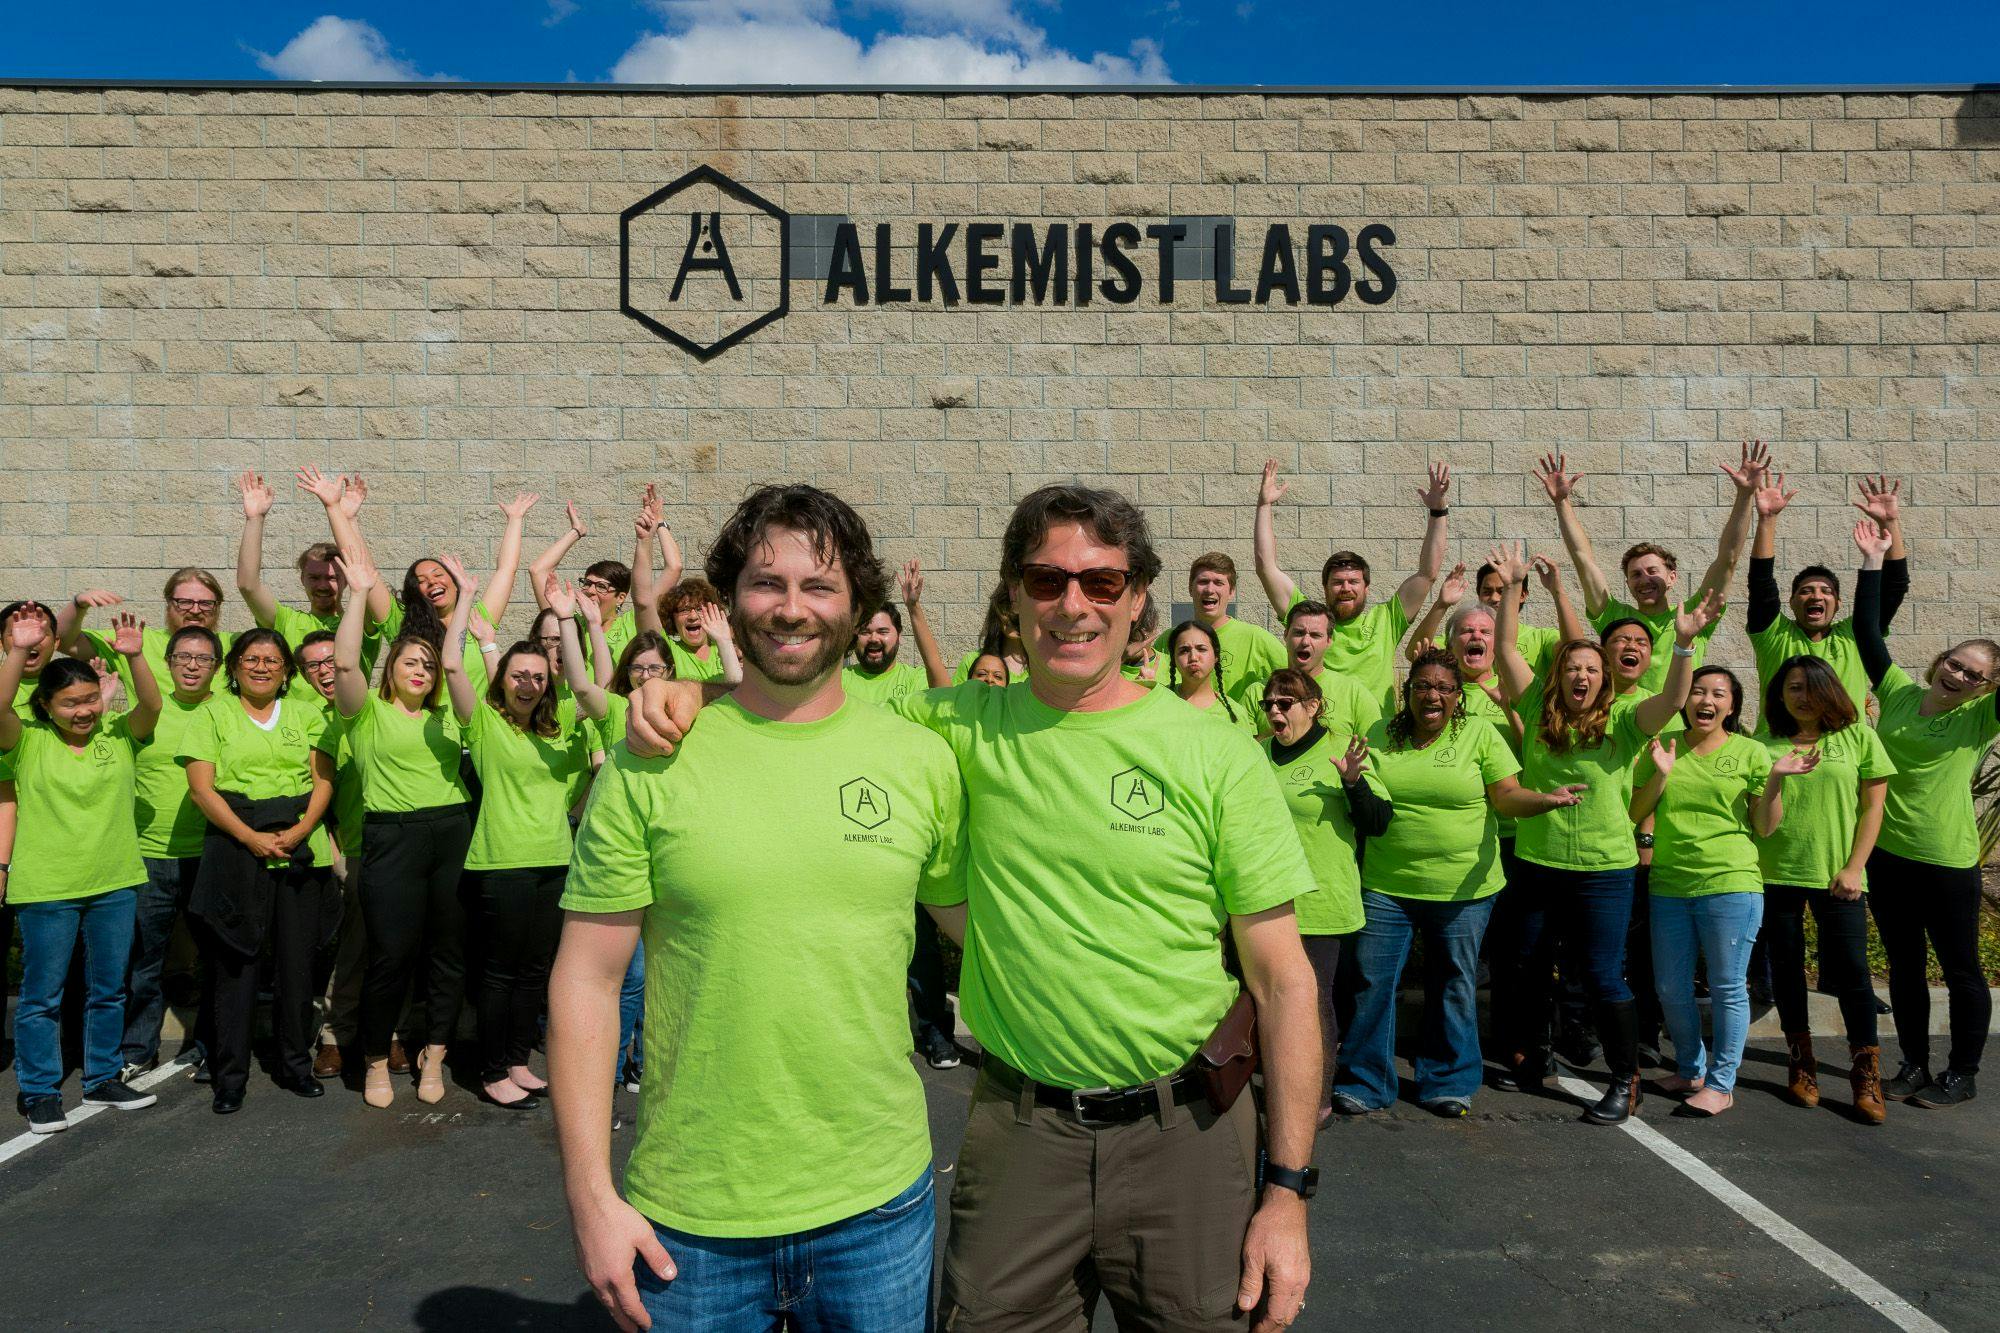 Alkemist Labs, the boutique, family-owned laboratory, has taken on industry Goliaths, powered by “tenacity, foresight, and a little crazy.”